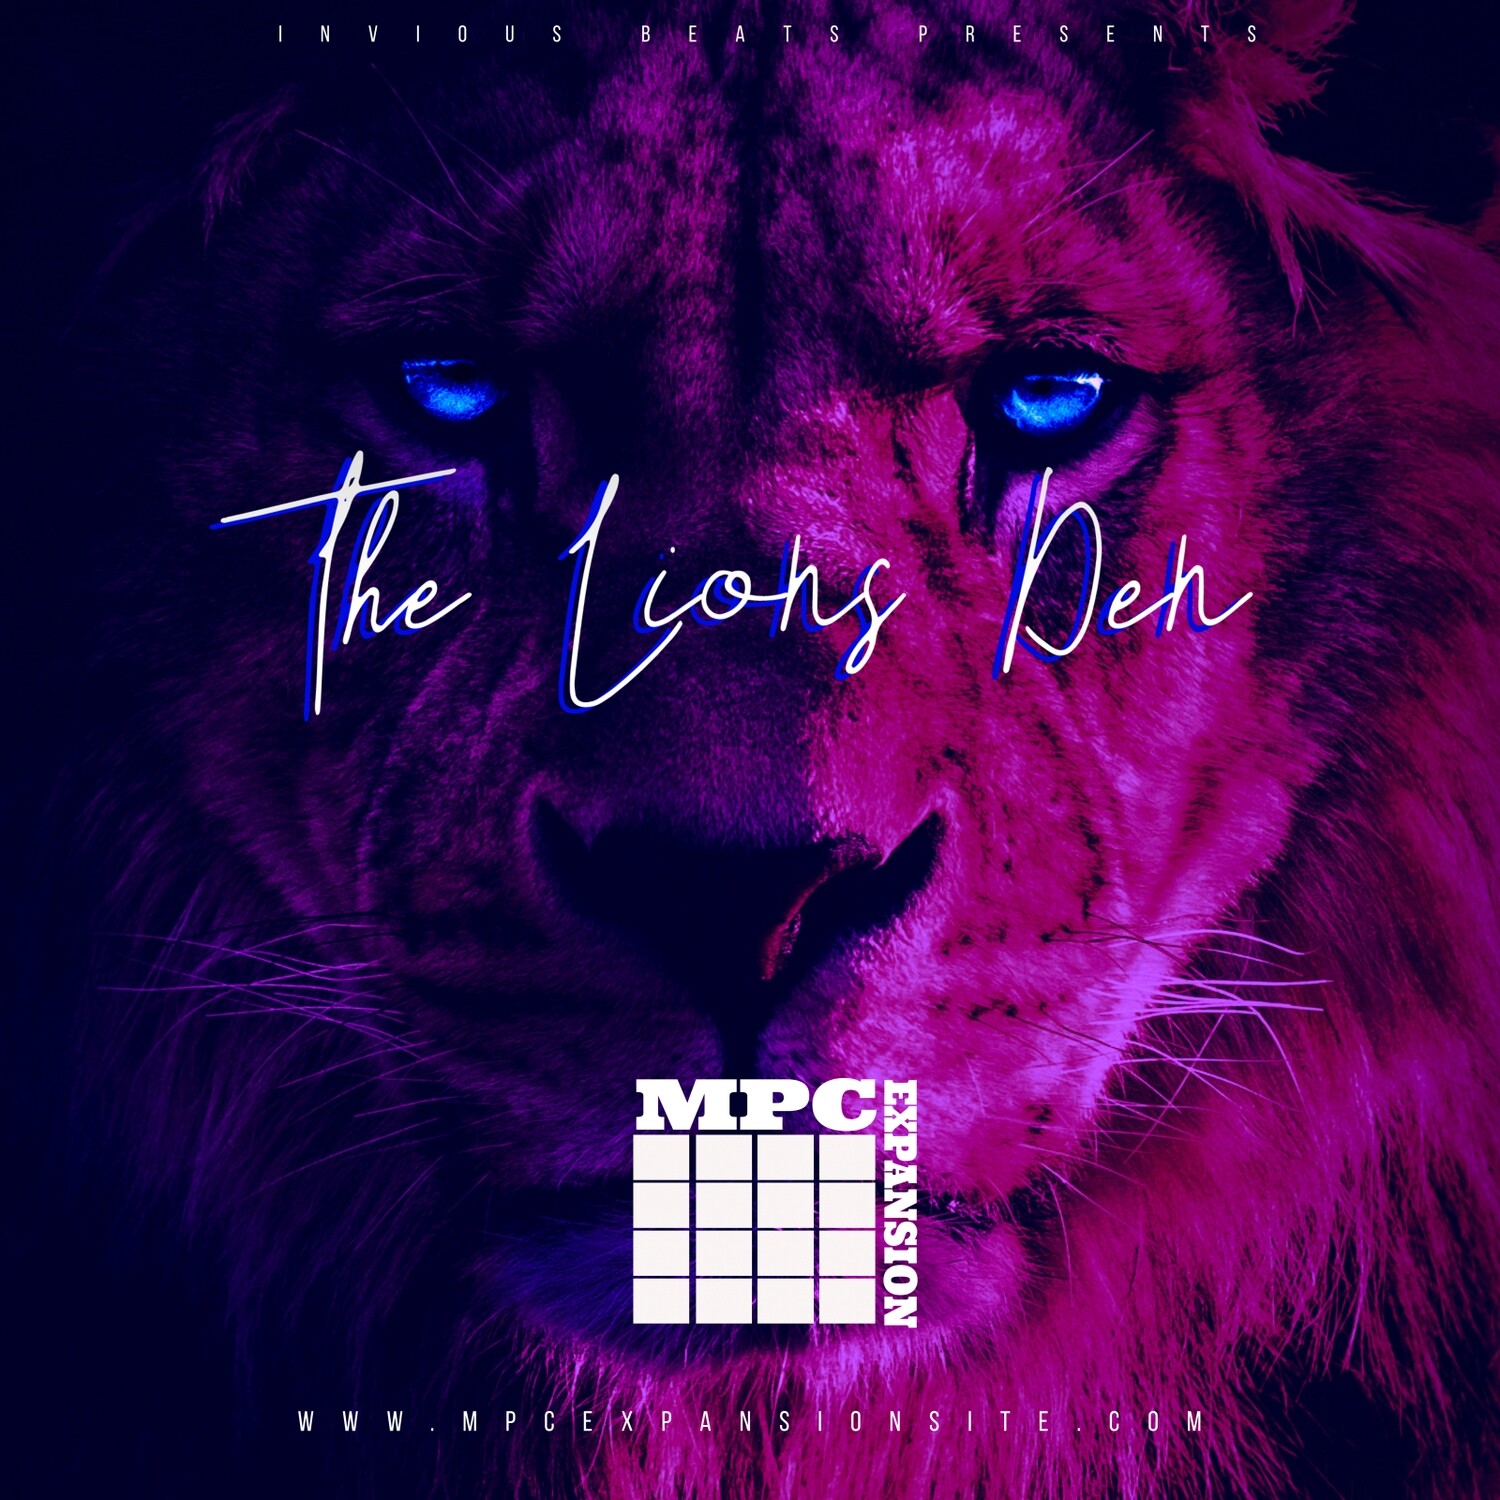 MPC EXPANSION 'THE LIONS DEN' by INVIOUS + THE LIONS DEN MIDI KIT